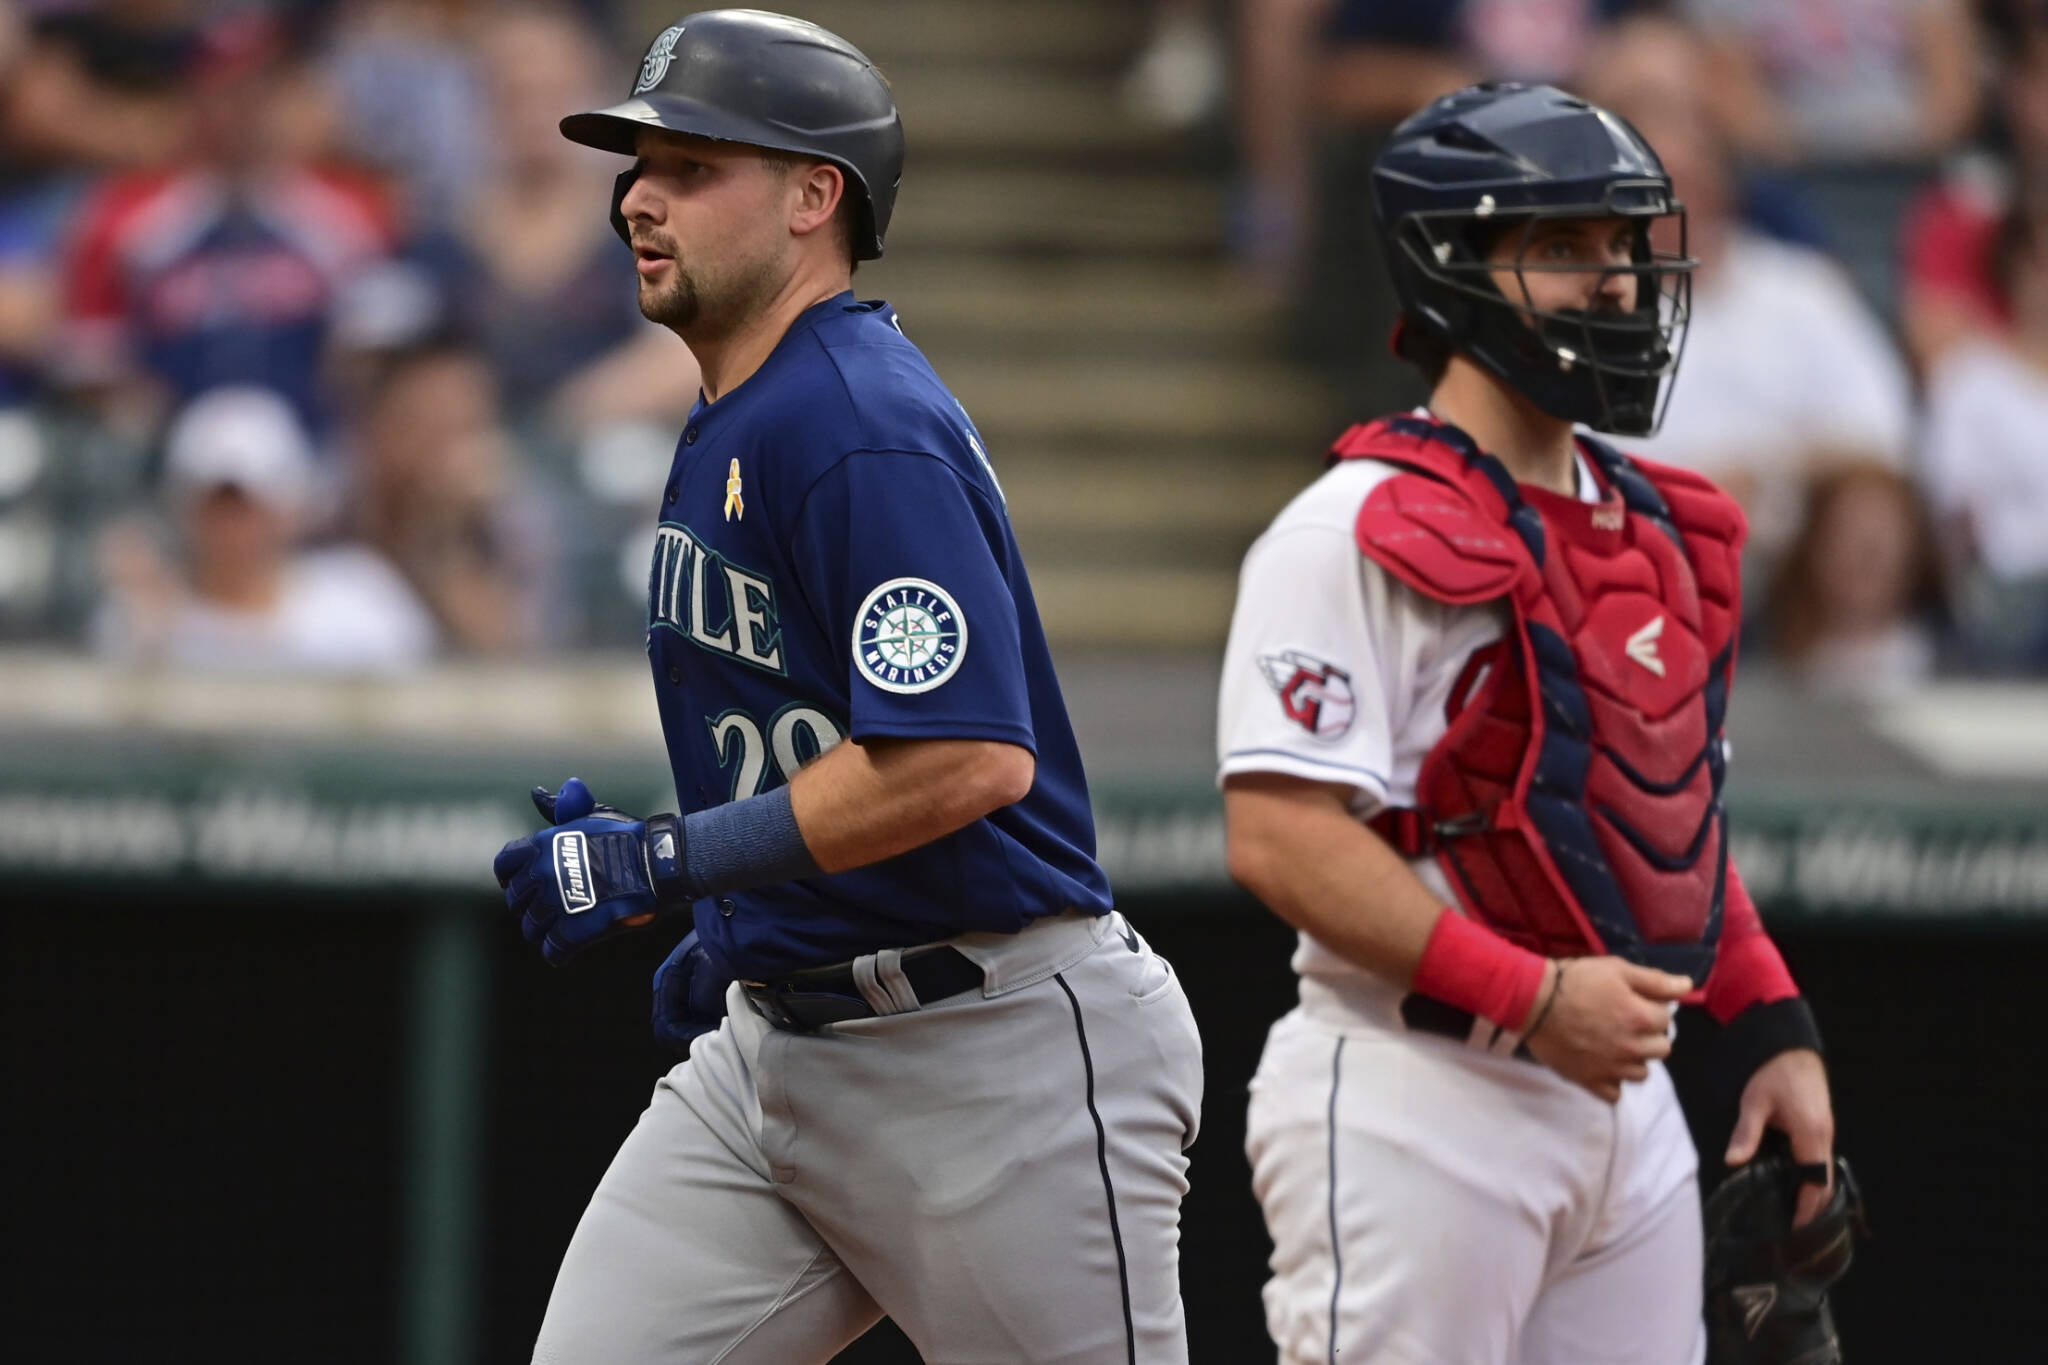 The Mariners’ Cal Raleigh runs the bases after hitting a solo home run off Guardians pitcher Cody Morris during the second inning of a game Friday in Cleveland. (AP Photo/David Dermer)